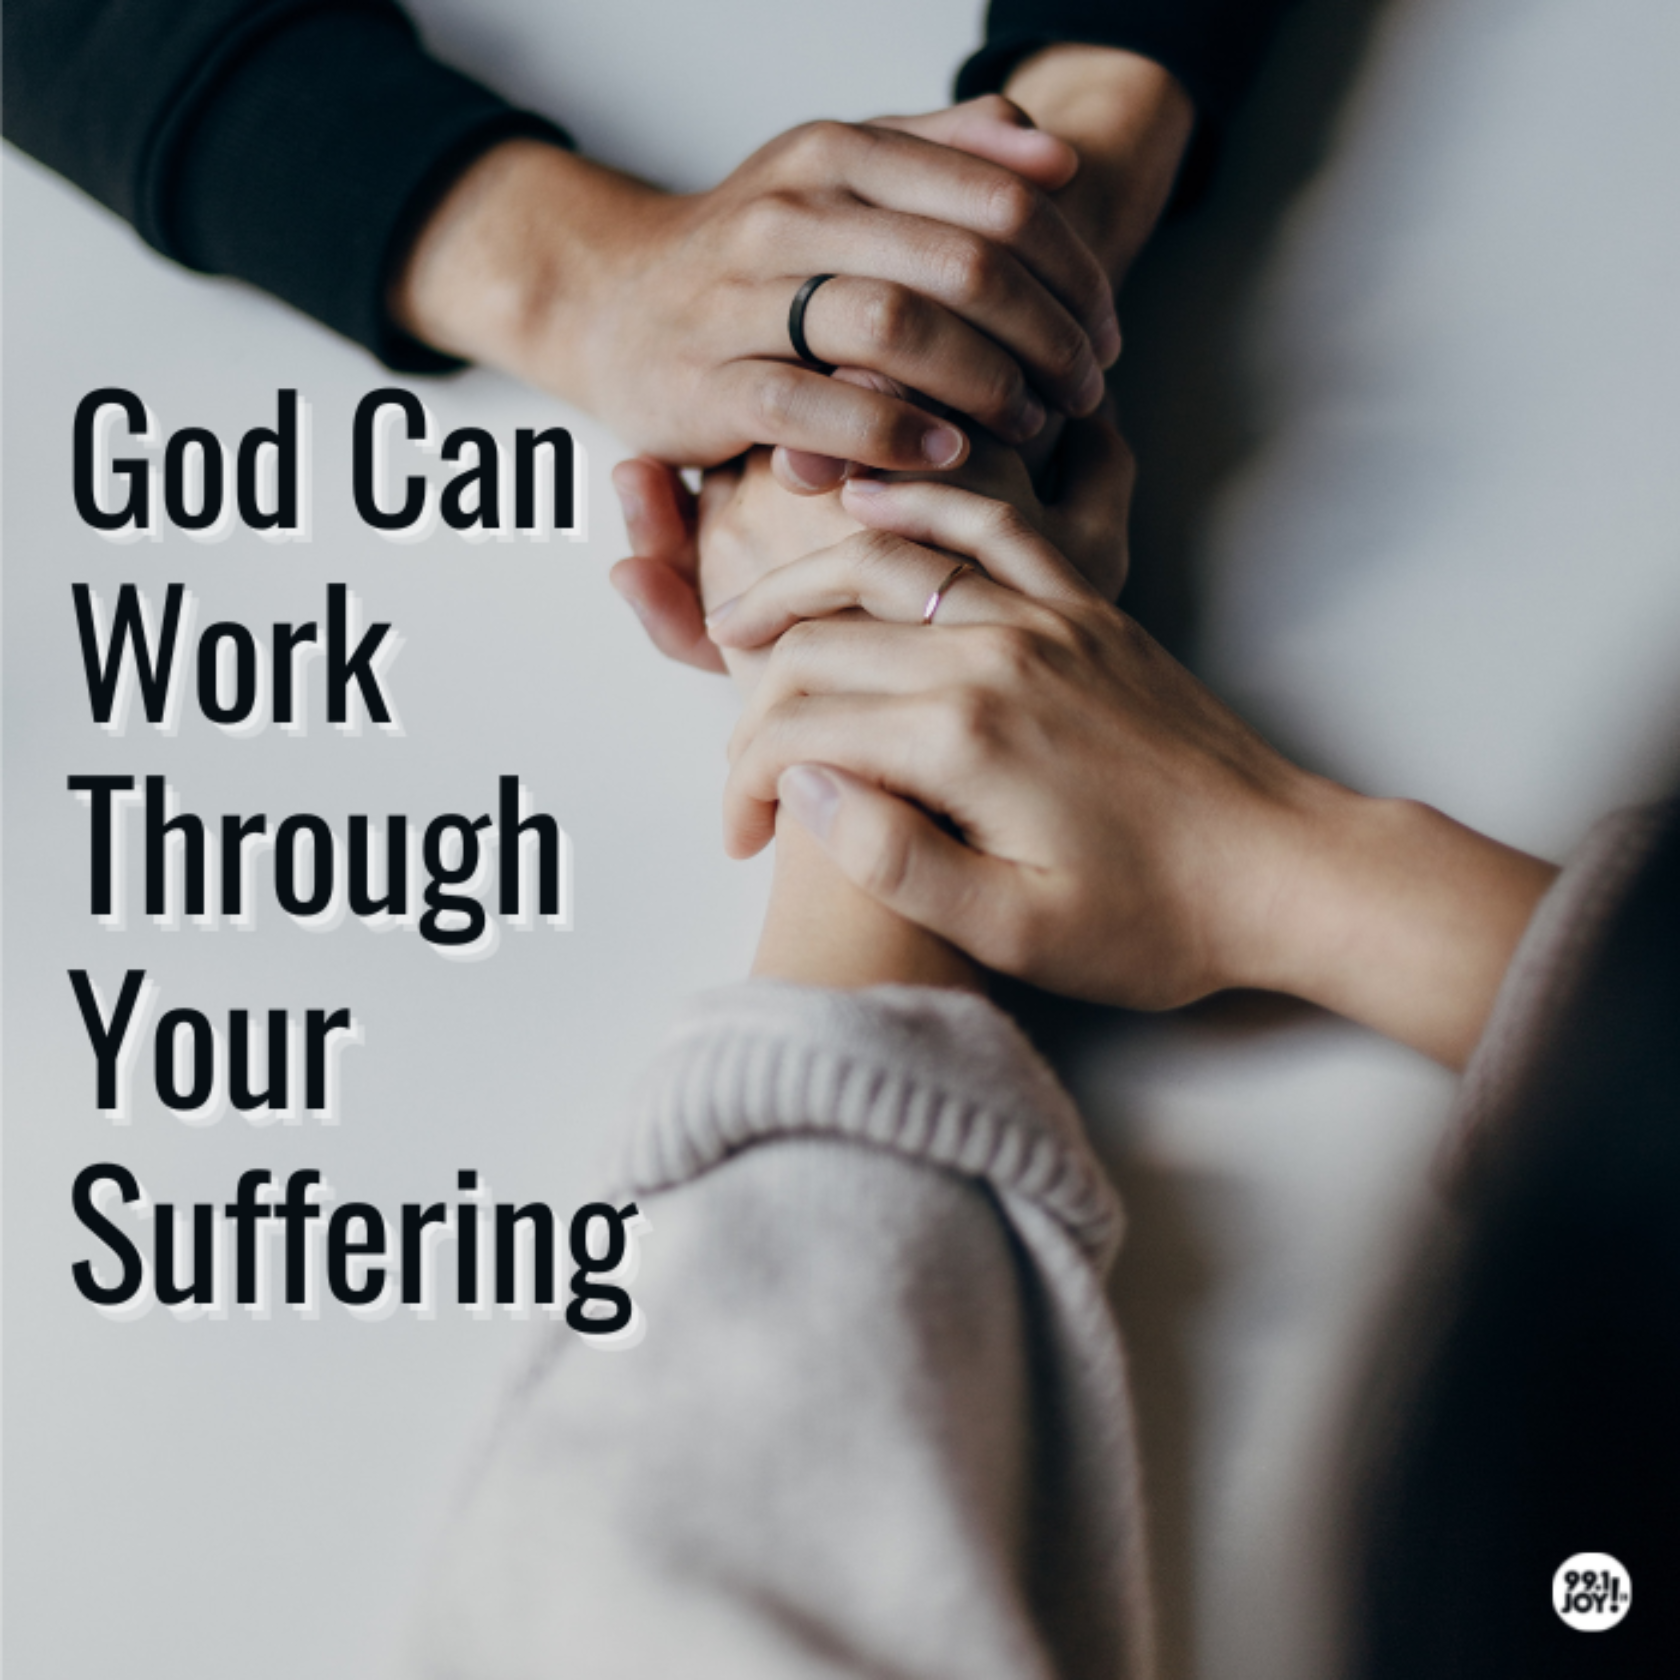 God Can Work Through Your Suffering